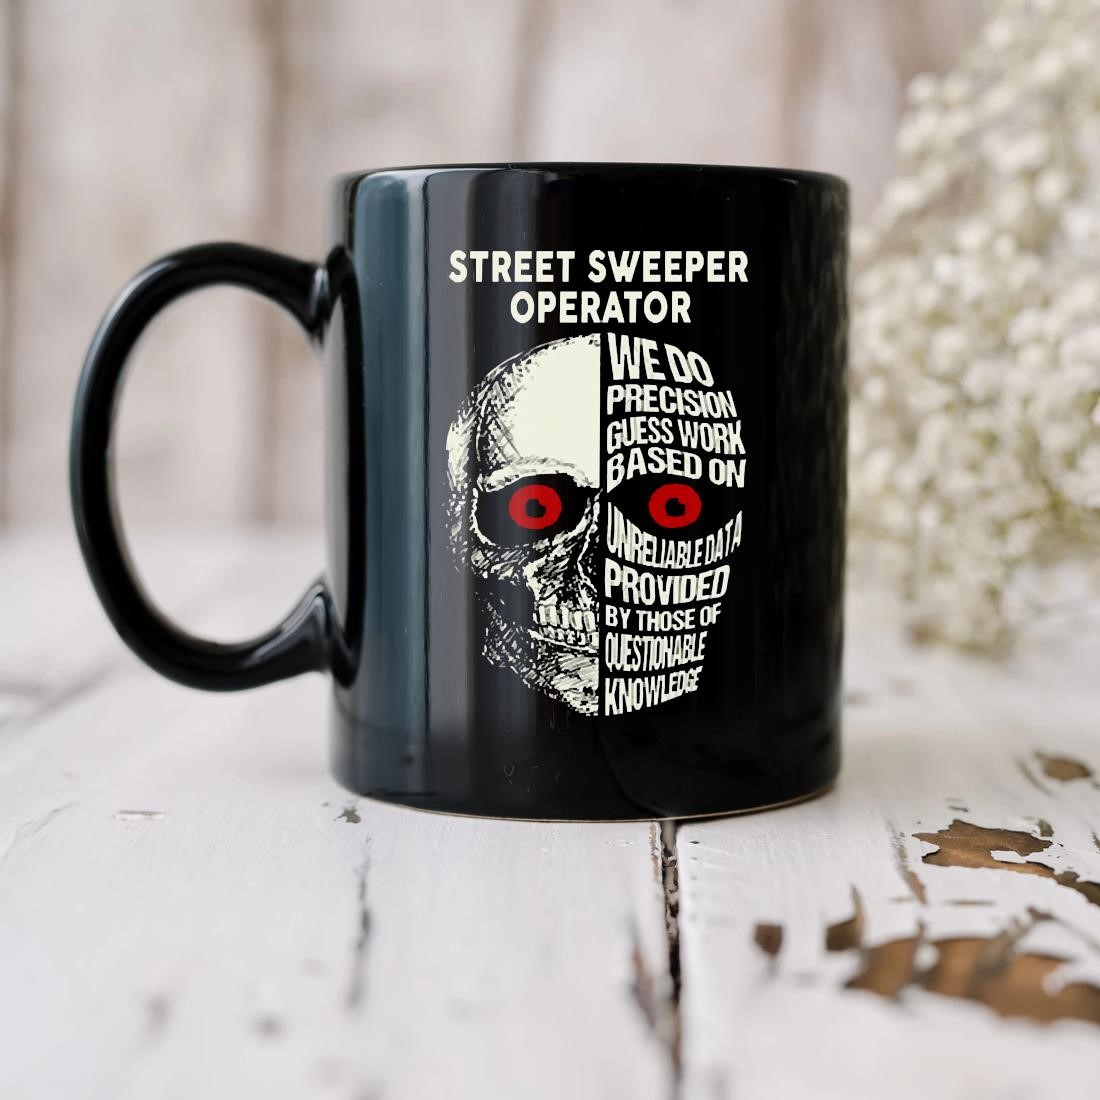 Street Sweeper Operator We Do Precision Guess Work Based On Unreliable Data Provided By Those Of Questionable Knowledge Skull Mug biu.jpg